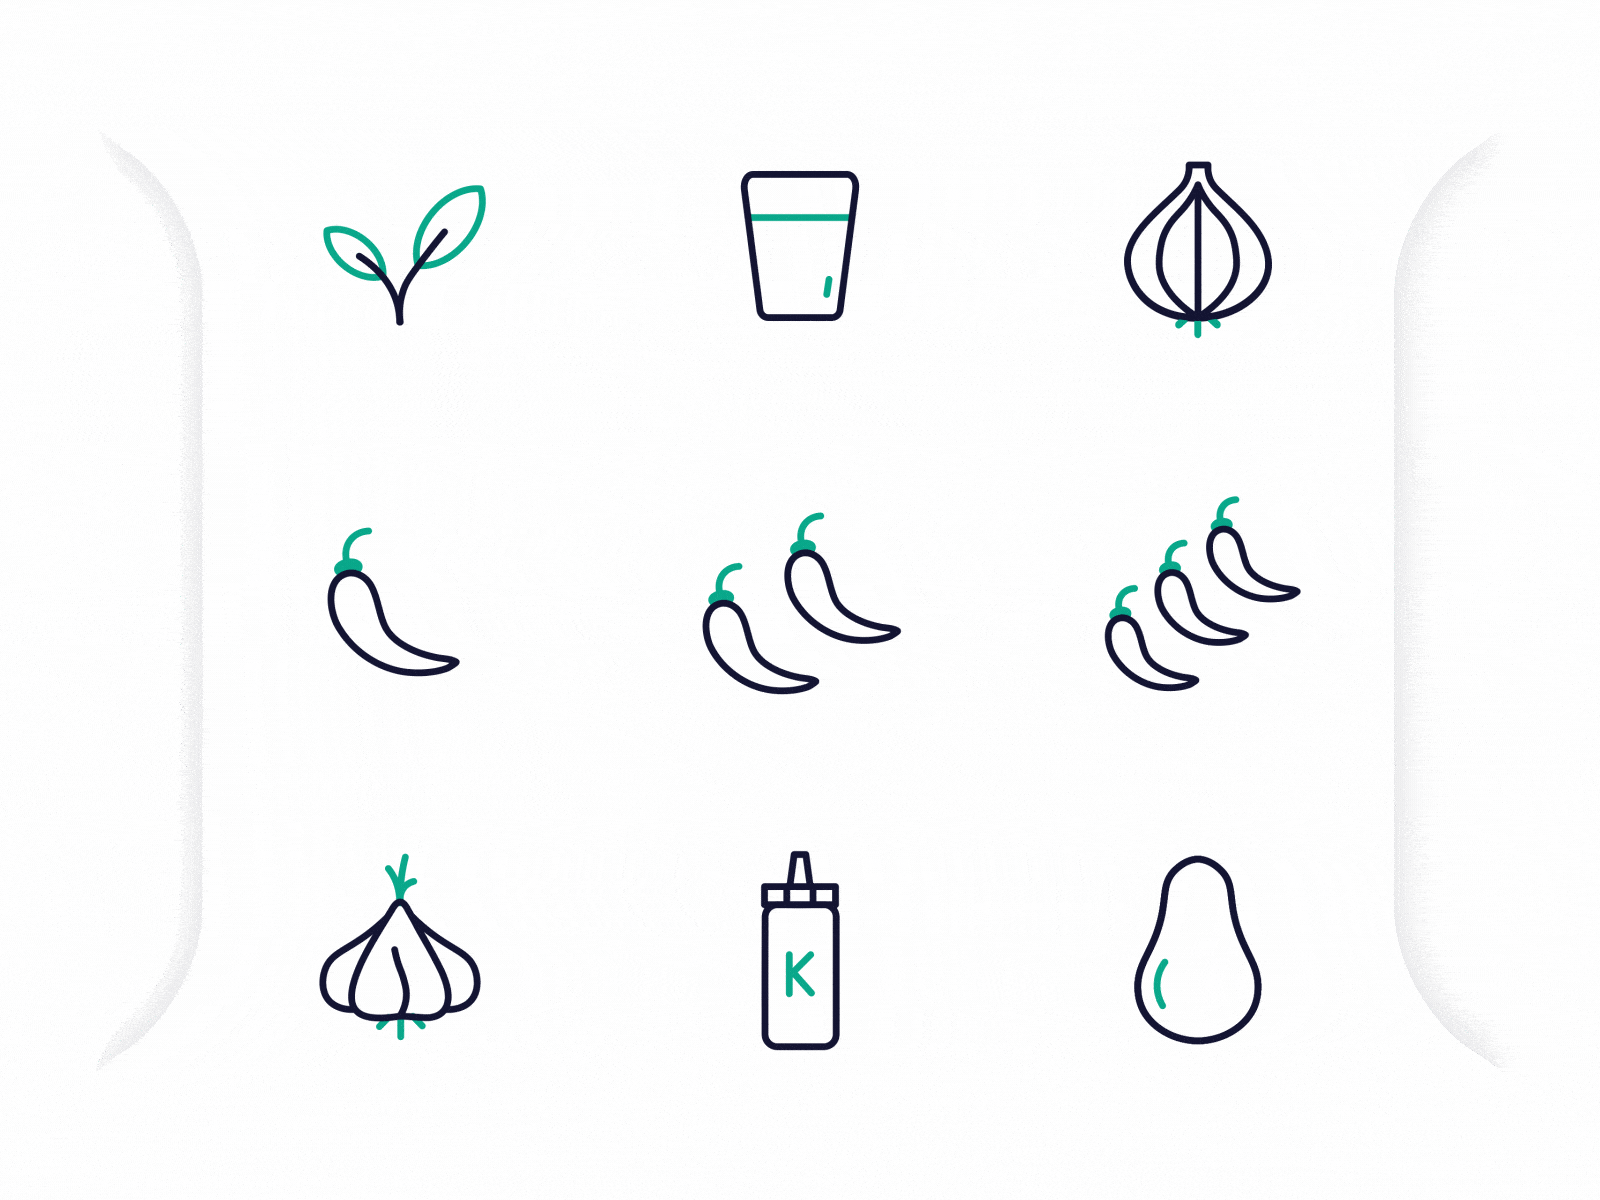 Food Animated Icons #7 animation animation 2d avocado bodymovin chilli garlic glass herb hot icon ketchup lottie microinteraction microinteractions motiongraphics onion svg animation vegan vegetarian water